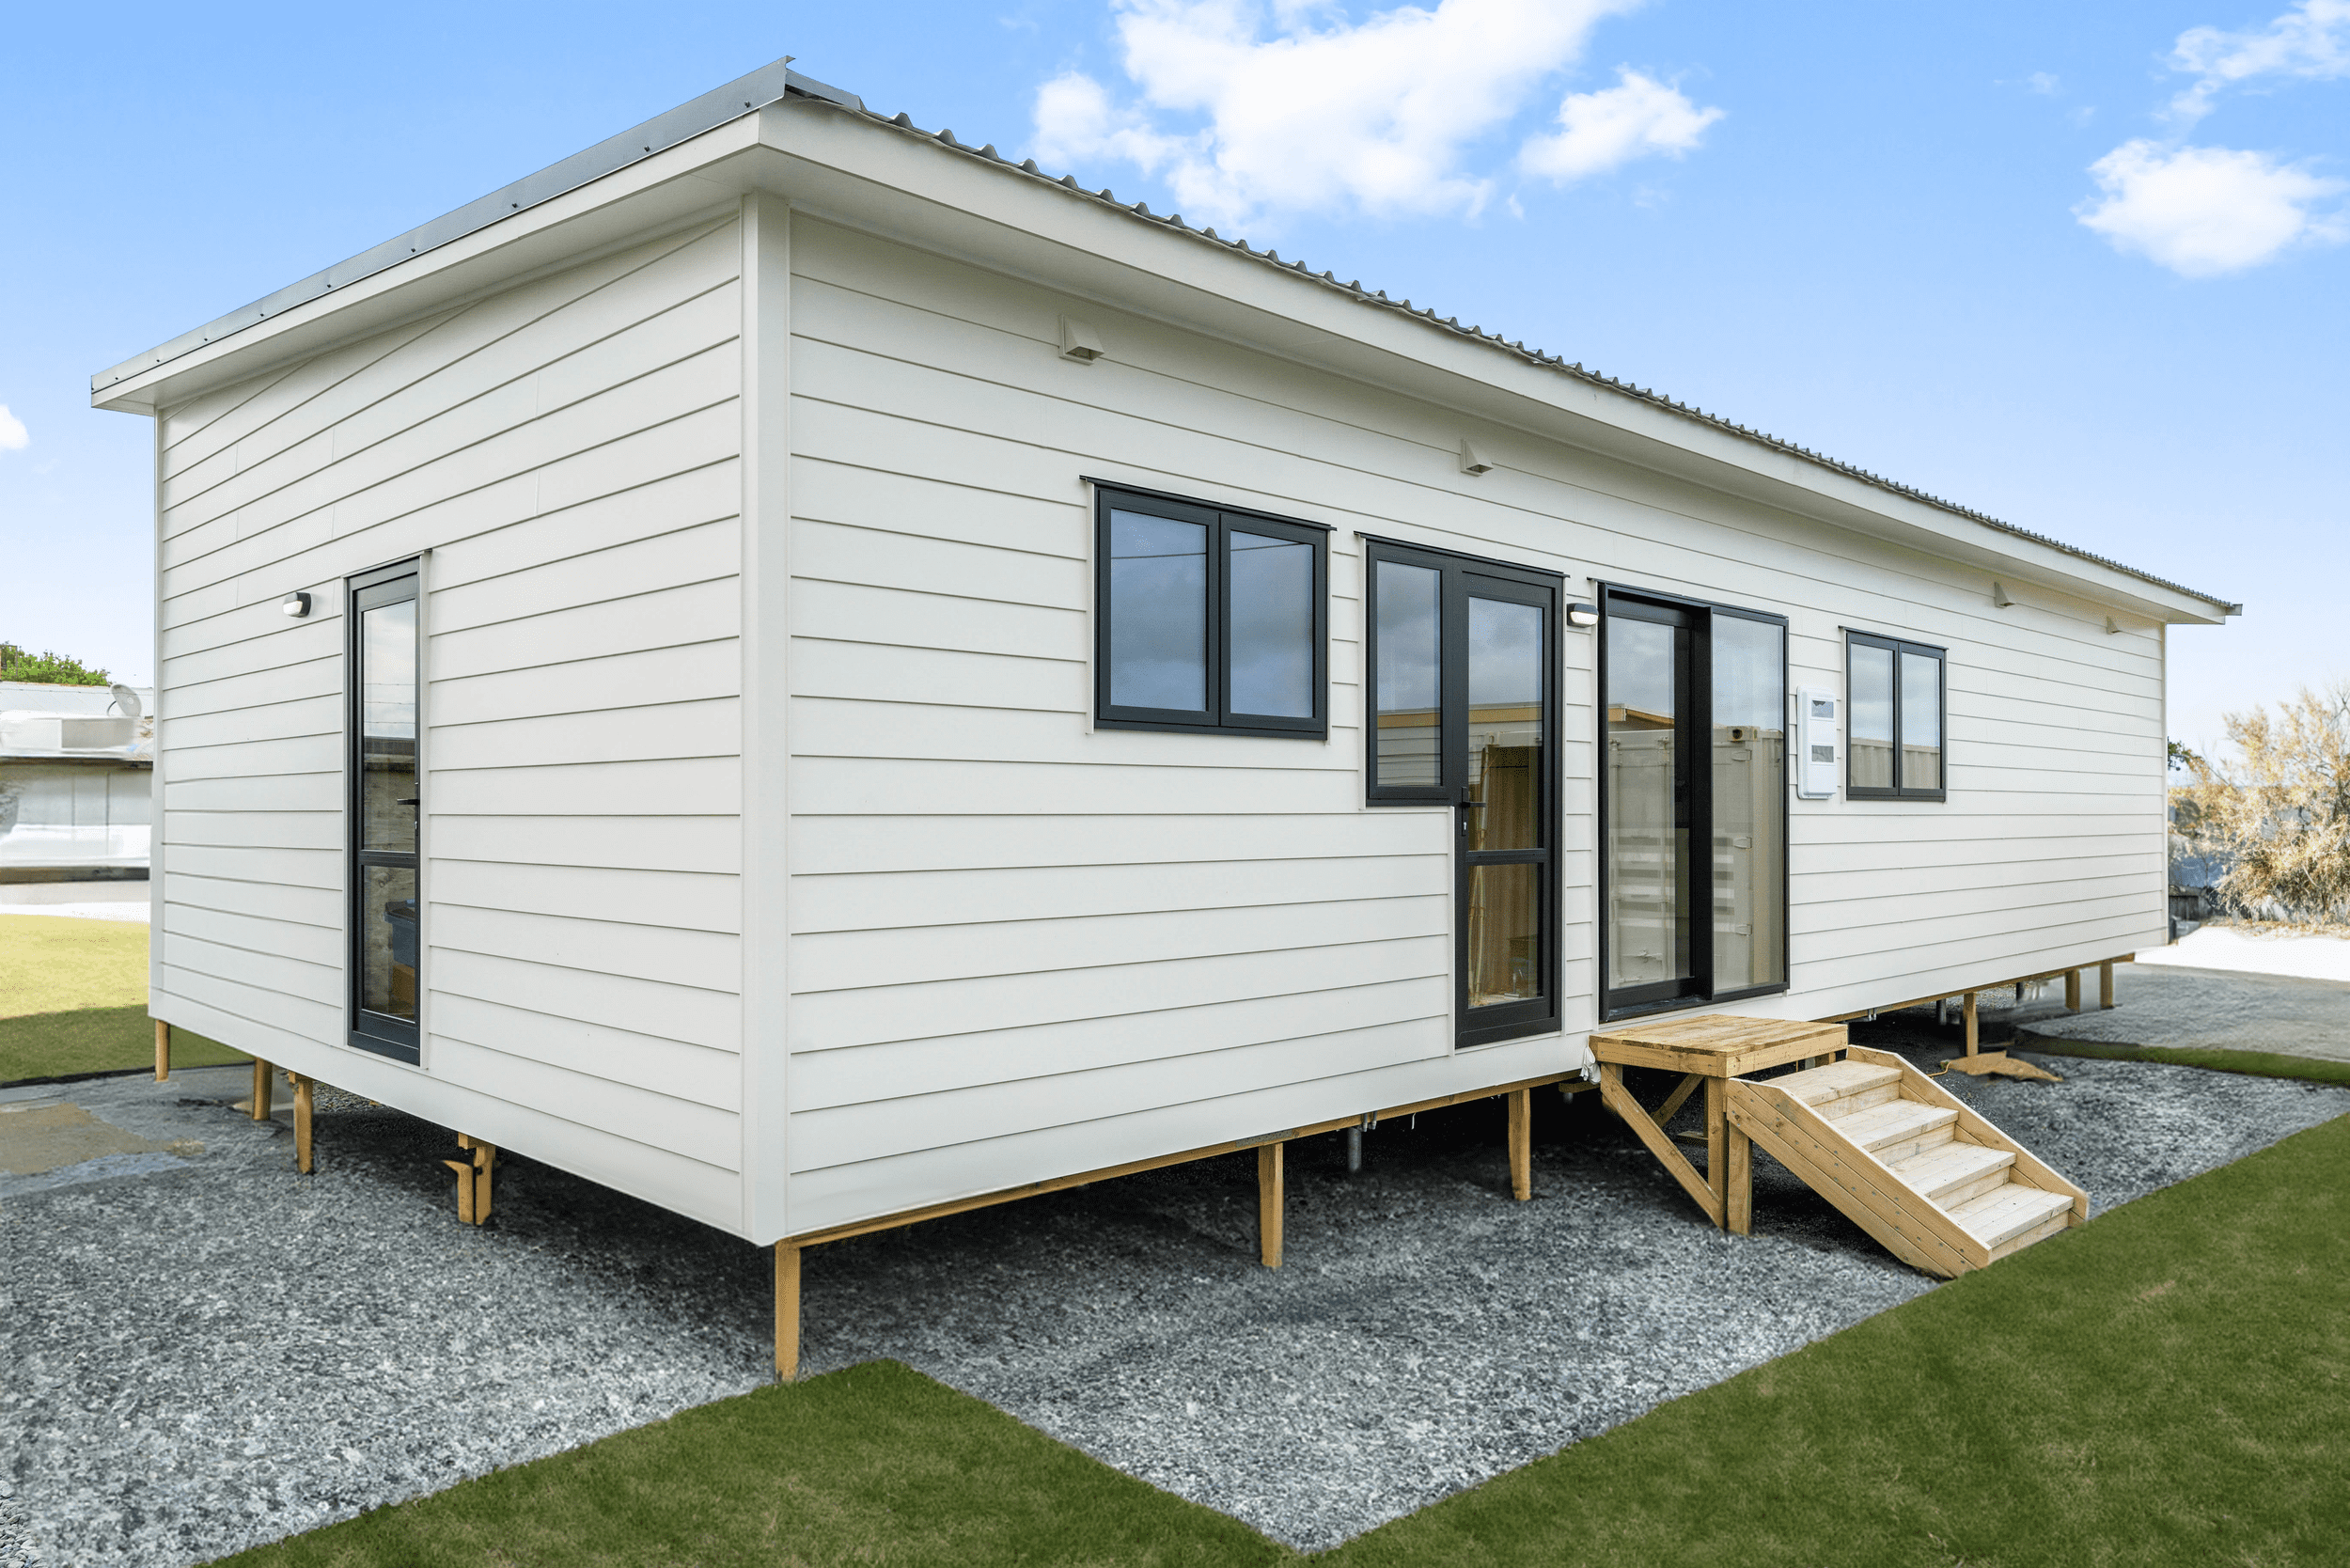 Transportable Homes for Sale NZ